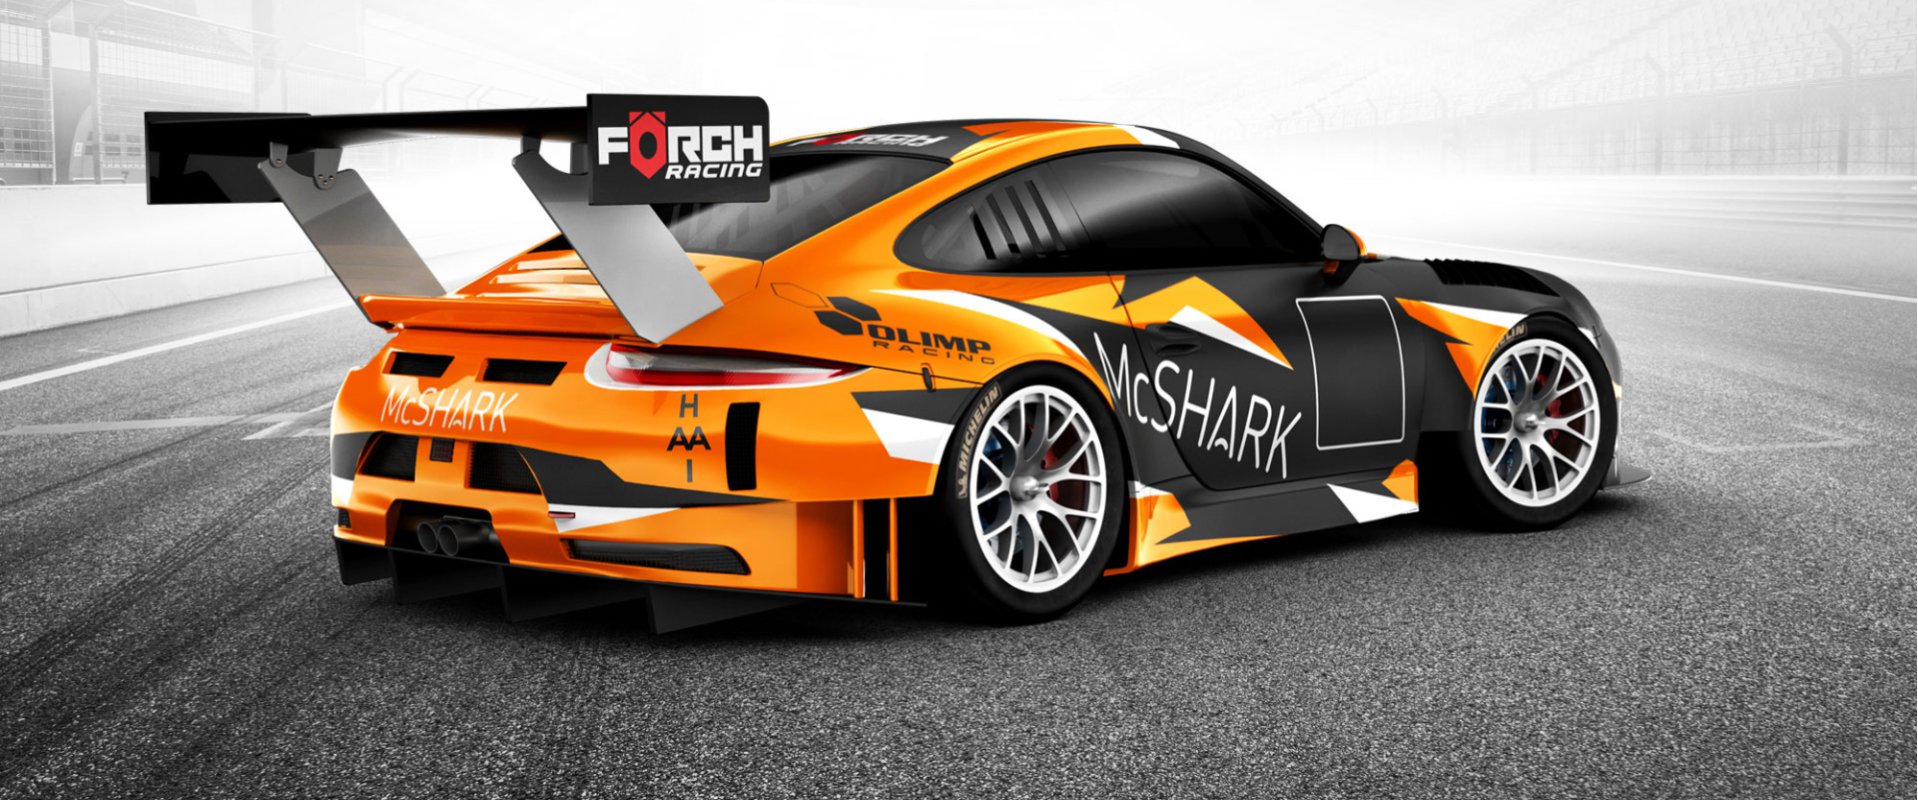 Forch Racing #3